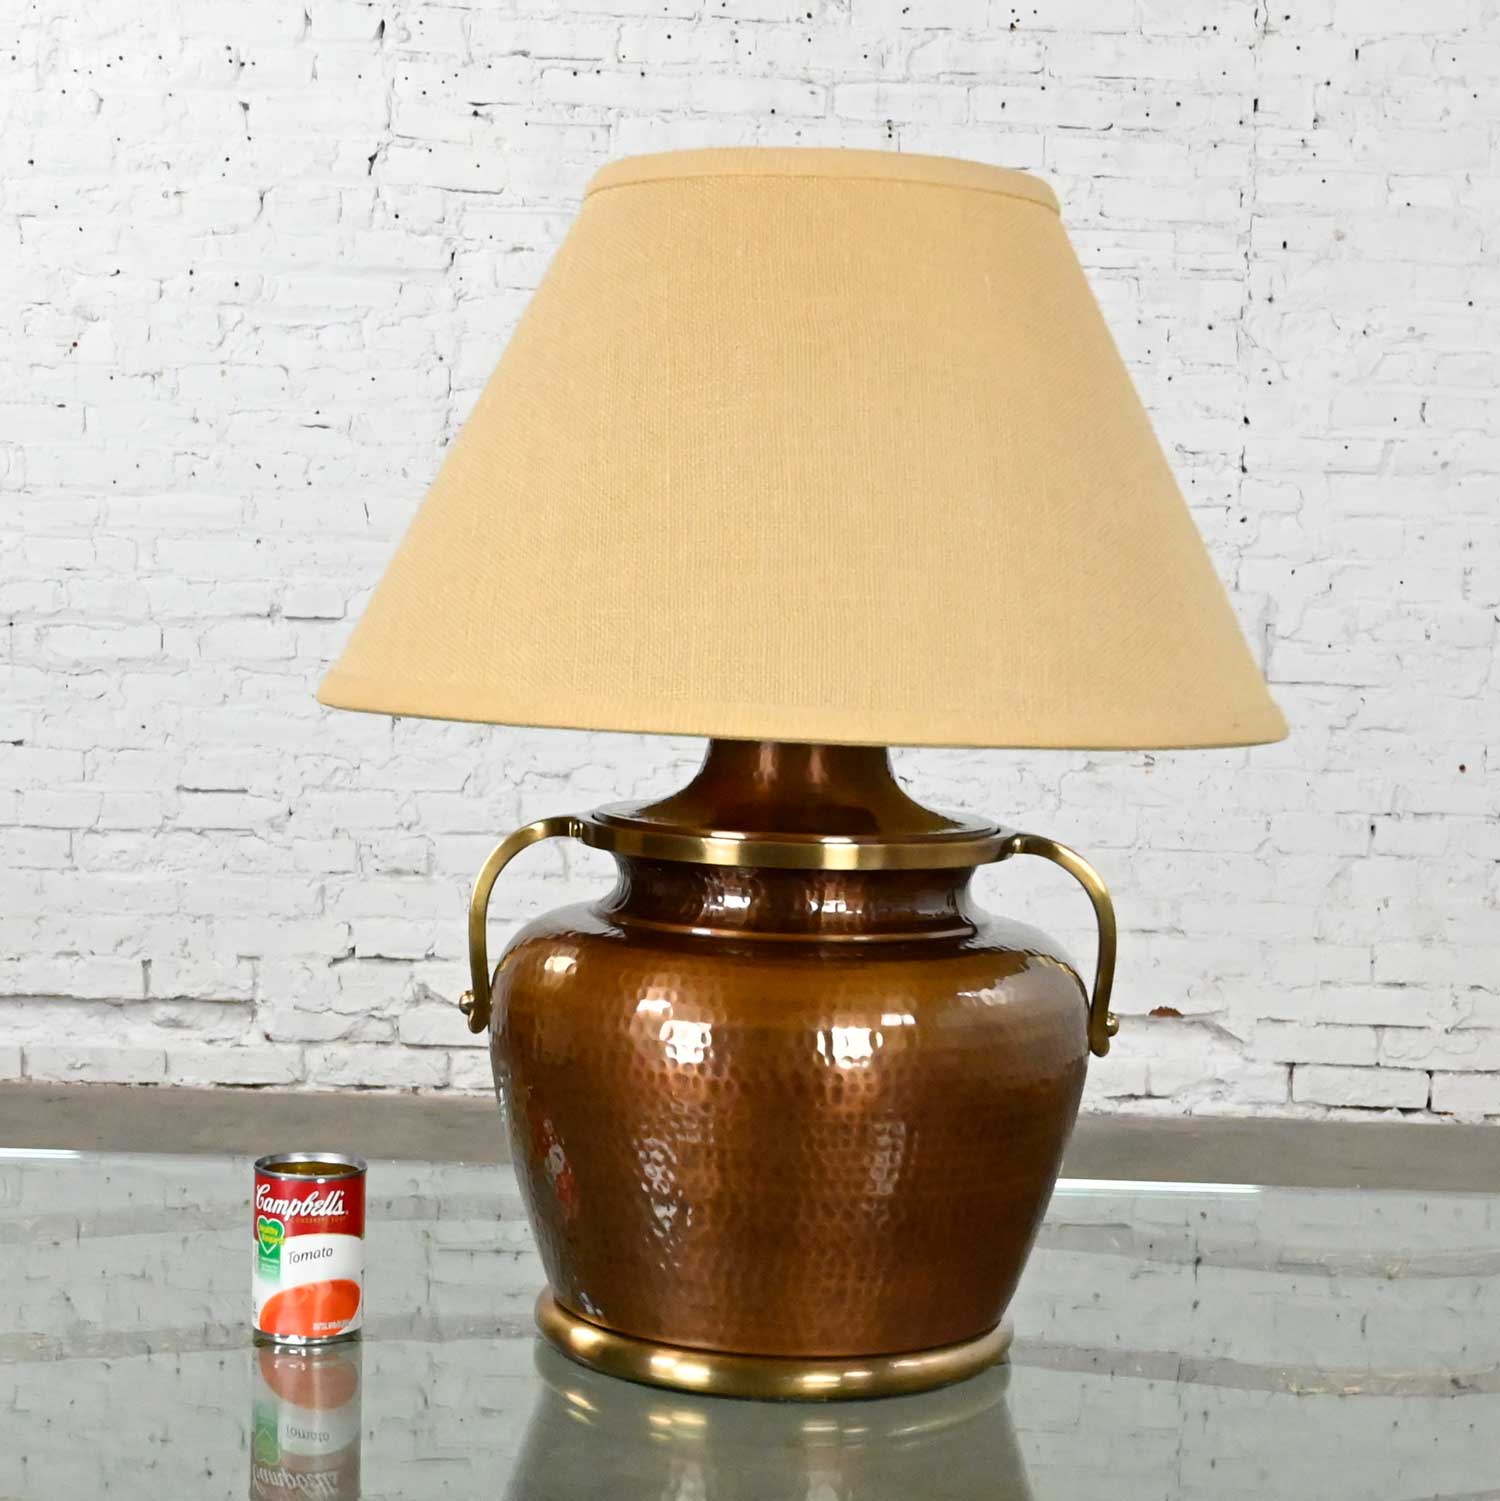 Moorish Style Hammered Copper Bulbus Urn Shaped Double Handled Monumental Lamp Style Frederick Cooper